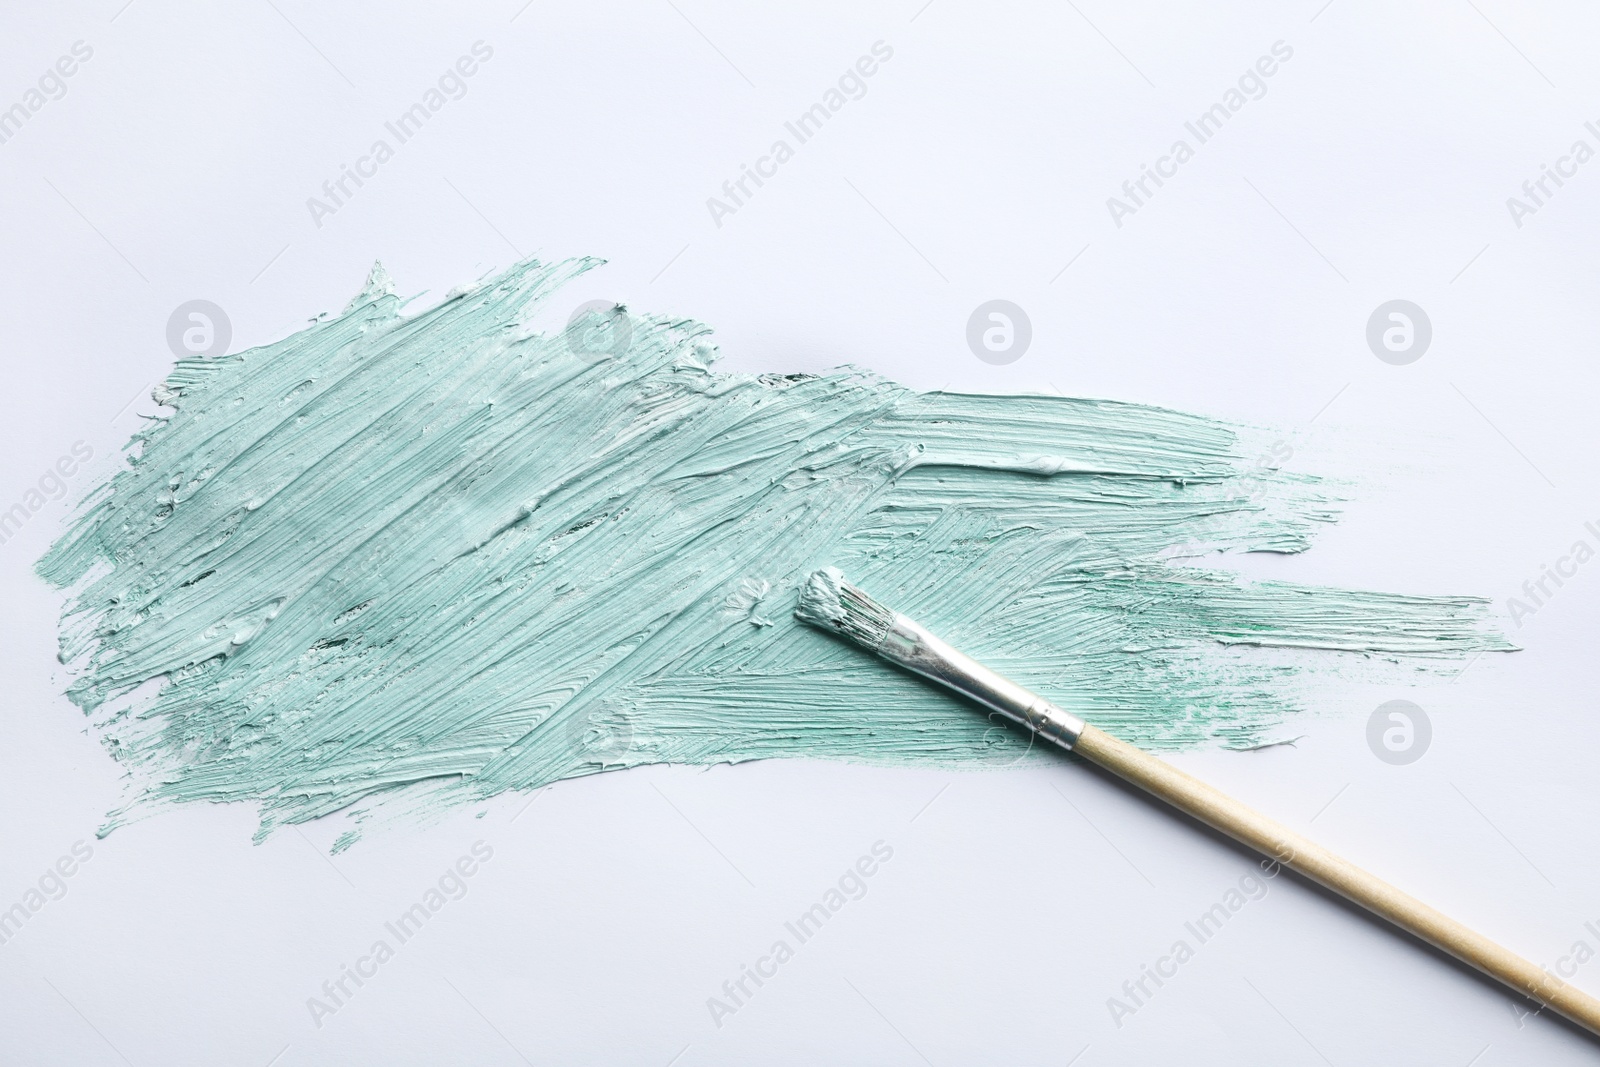 Photo of Paint stroke and brush on white background, top view